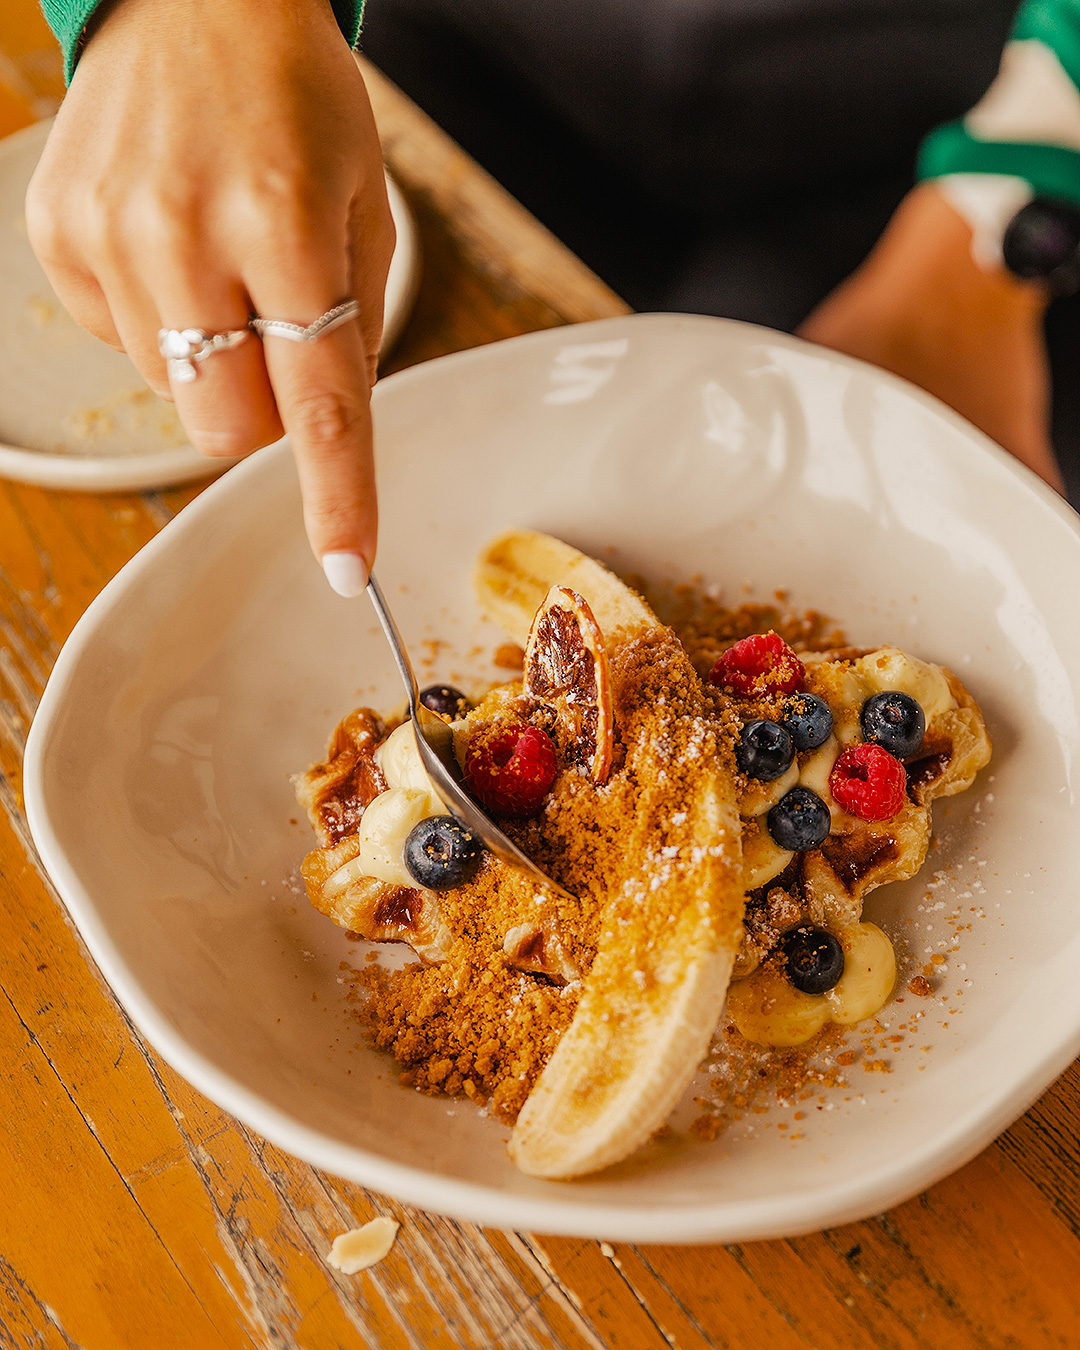 We tuck into the banana croffle at Chur Bae, one of the best spots for breakfast in Auckland CBD.